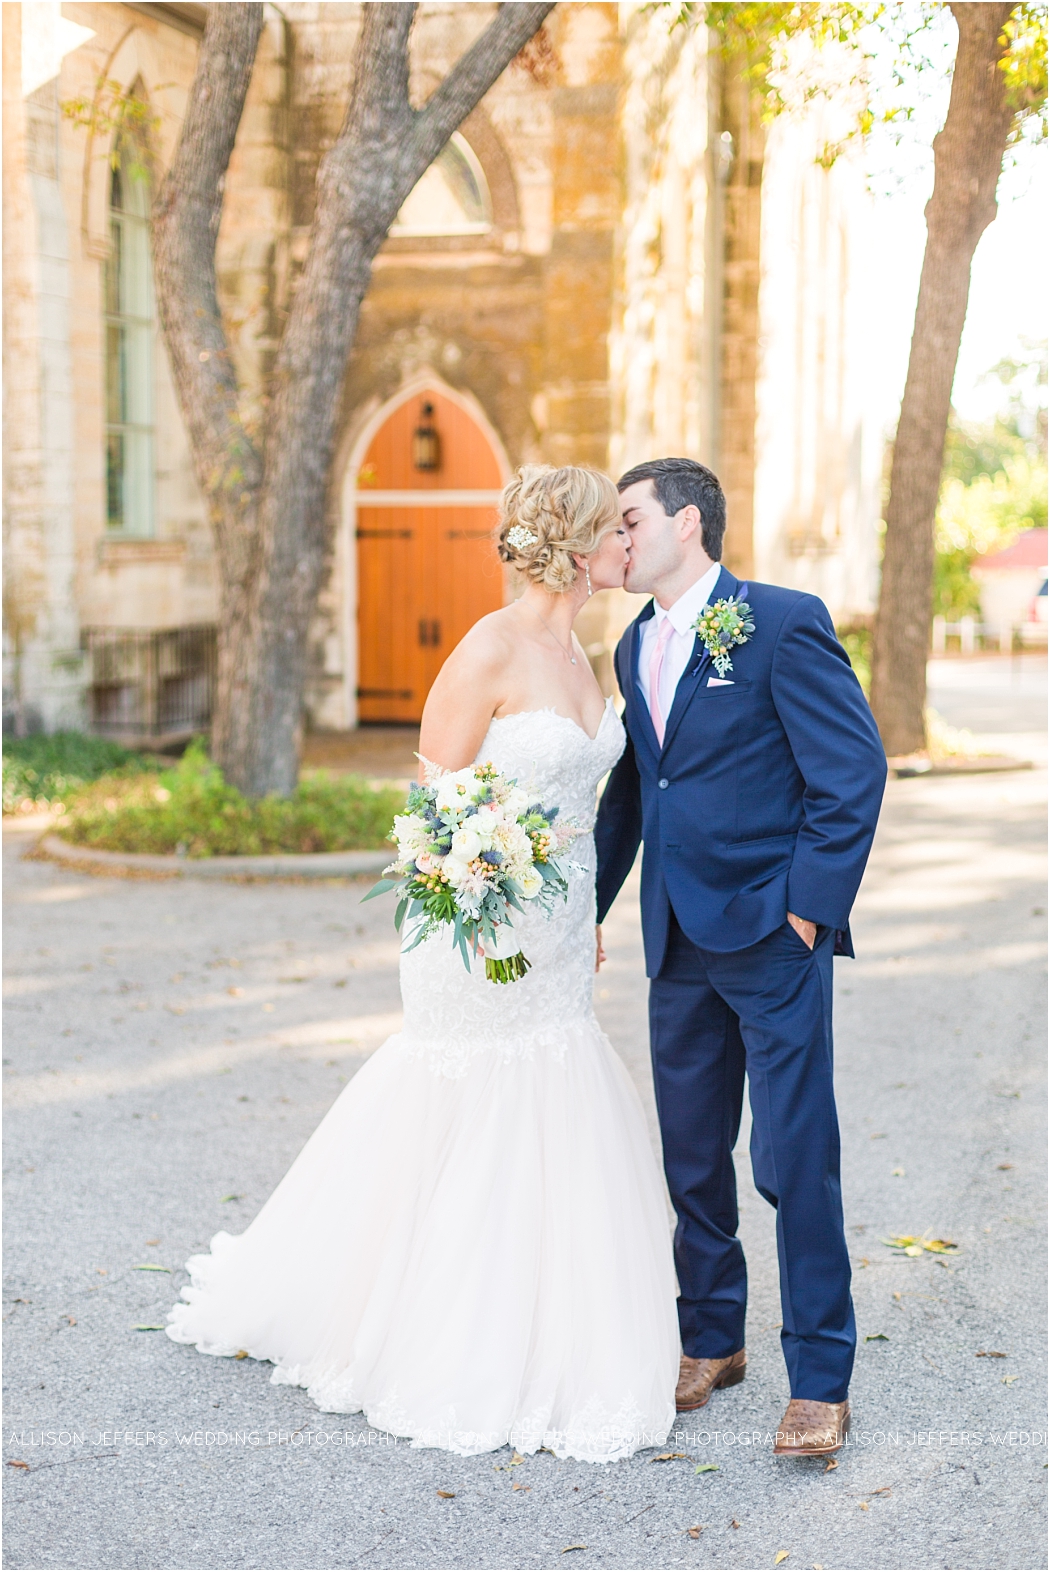 pastel-wedding-at-holy-ghost-lutheran-church-in-fredericksburg-texas-fredericksburg-wedding-photographer_0053